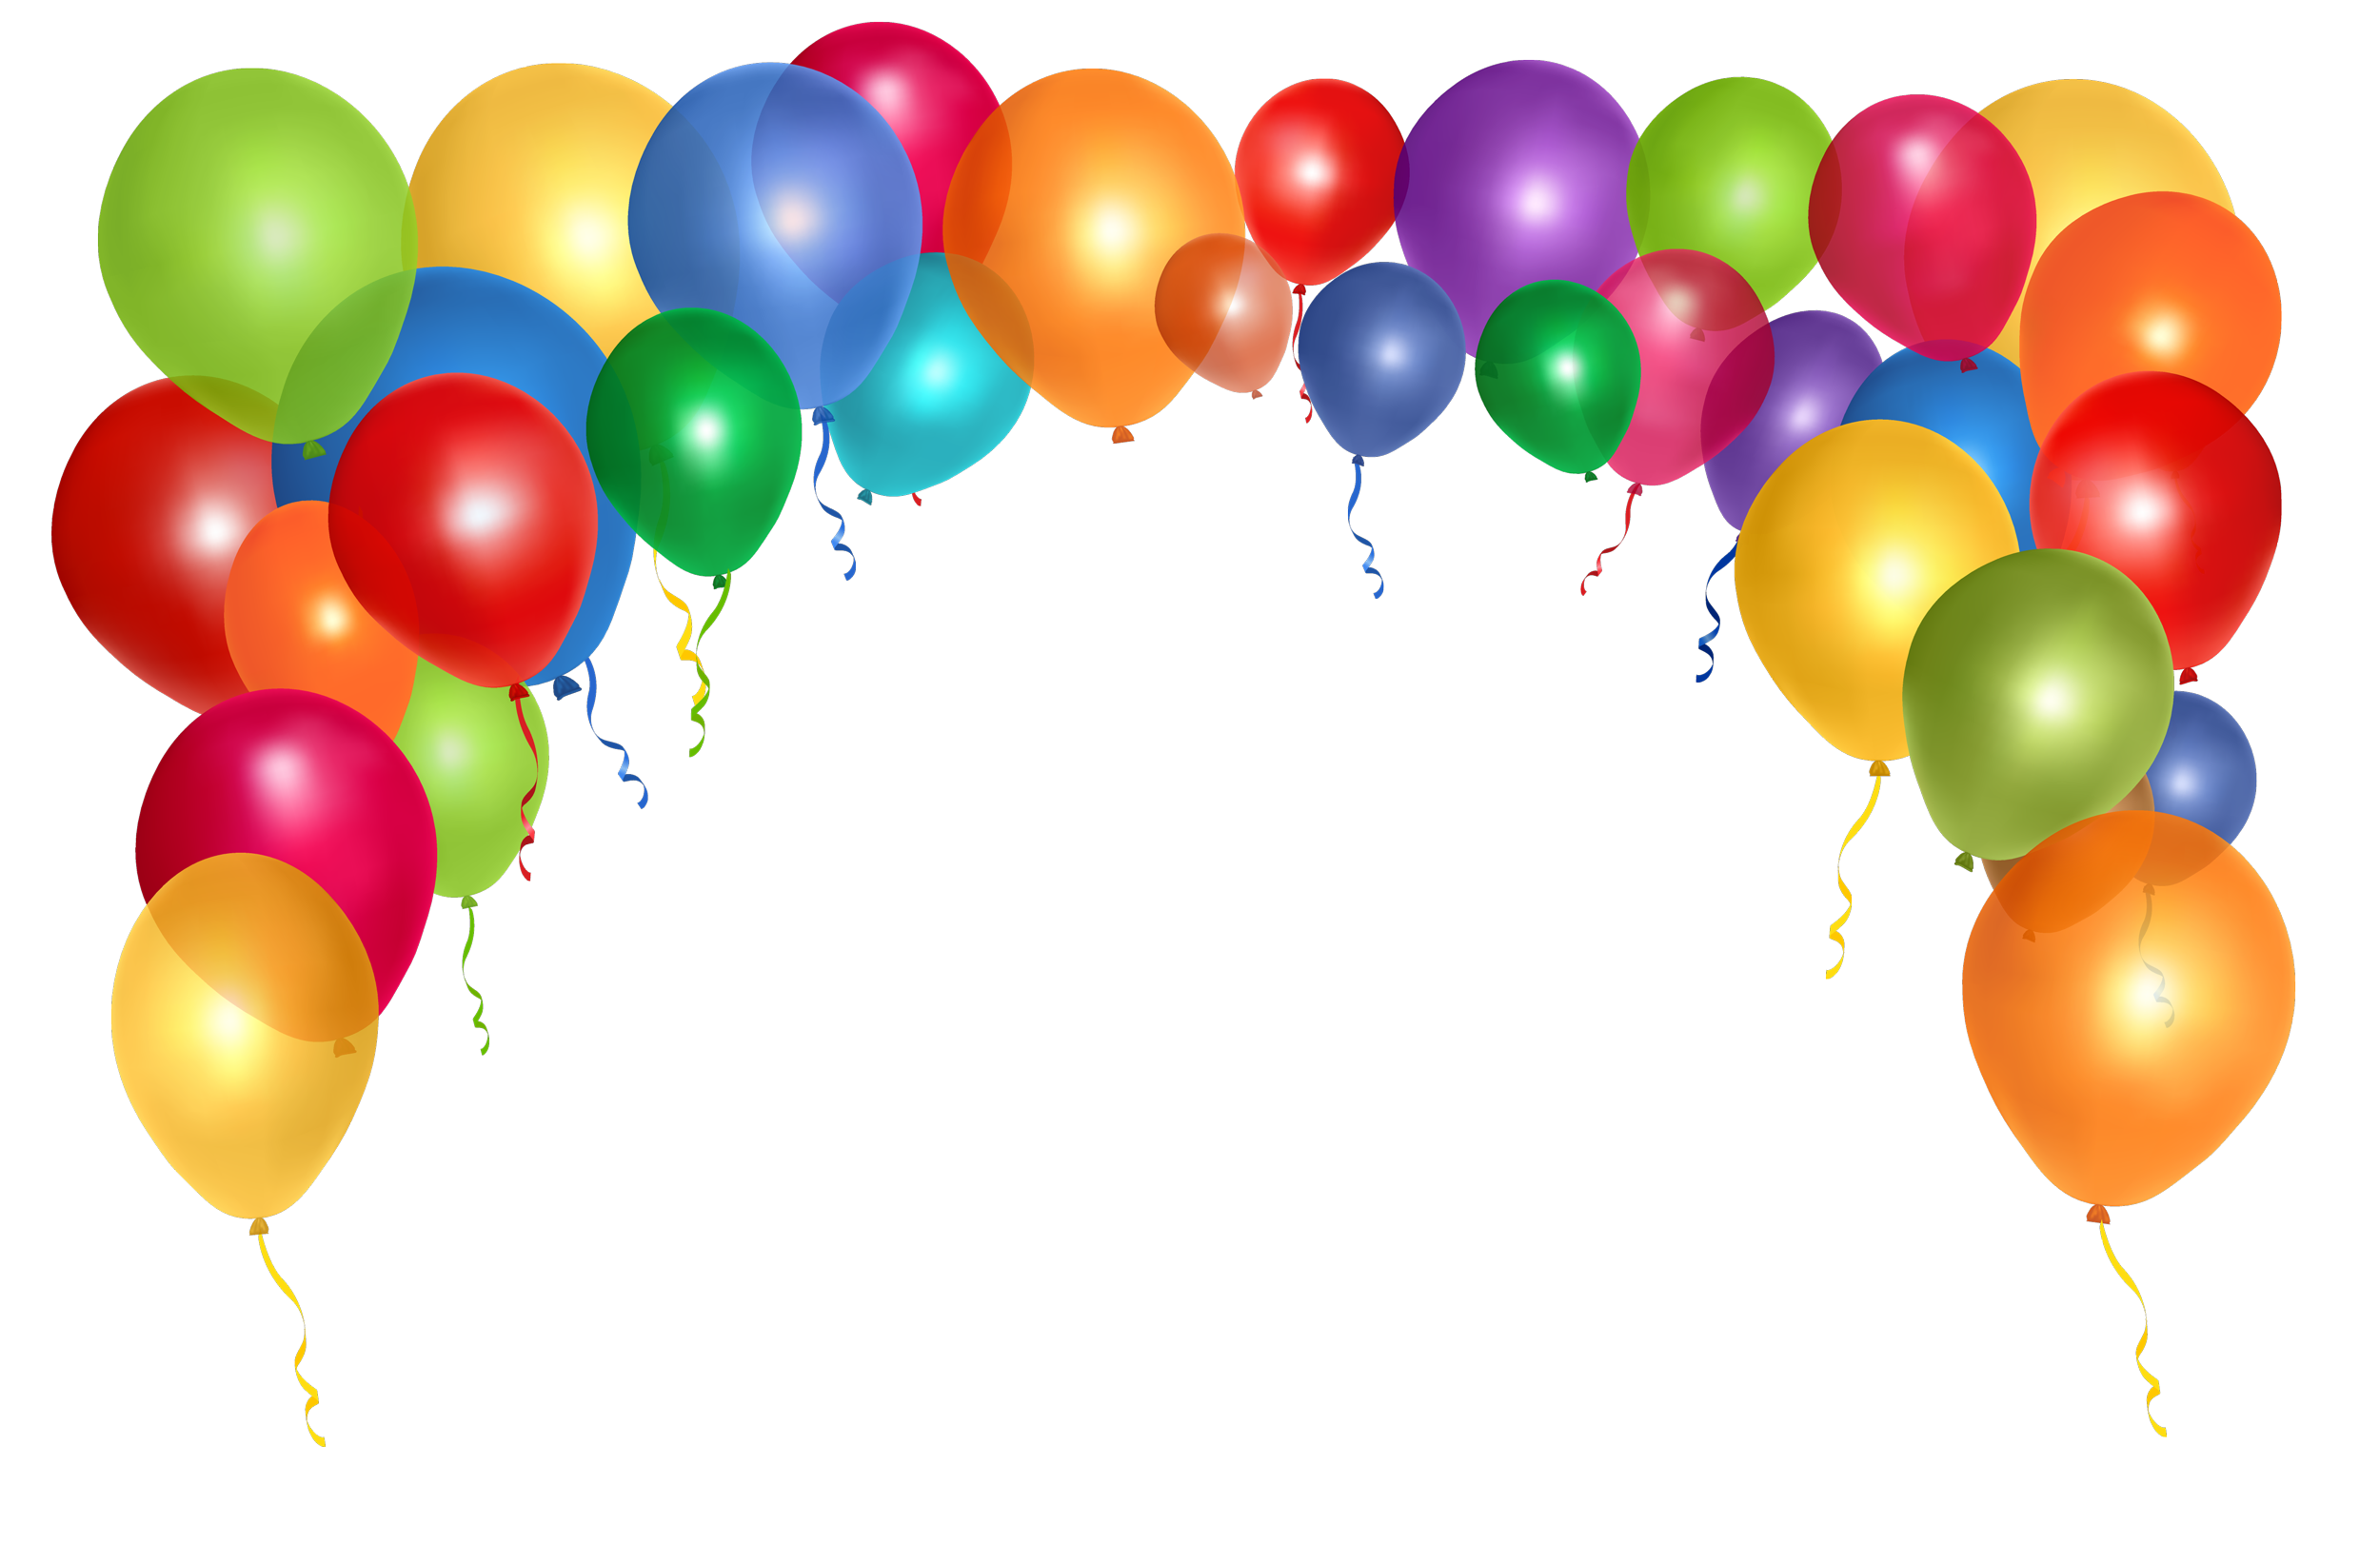 Download Balloons Png Free Download Transparent Background Birthday Balloons Png 2500x1644 Wallpaper Teahub Io